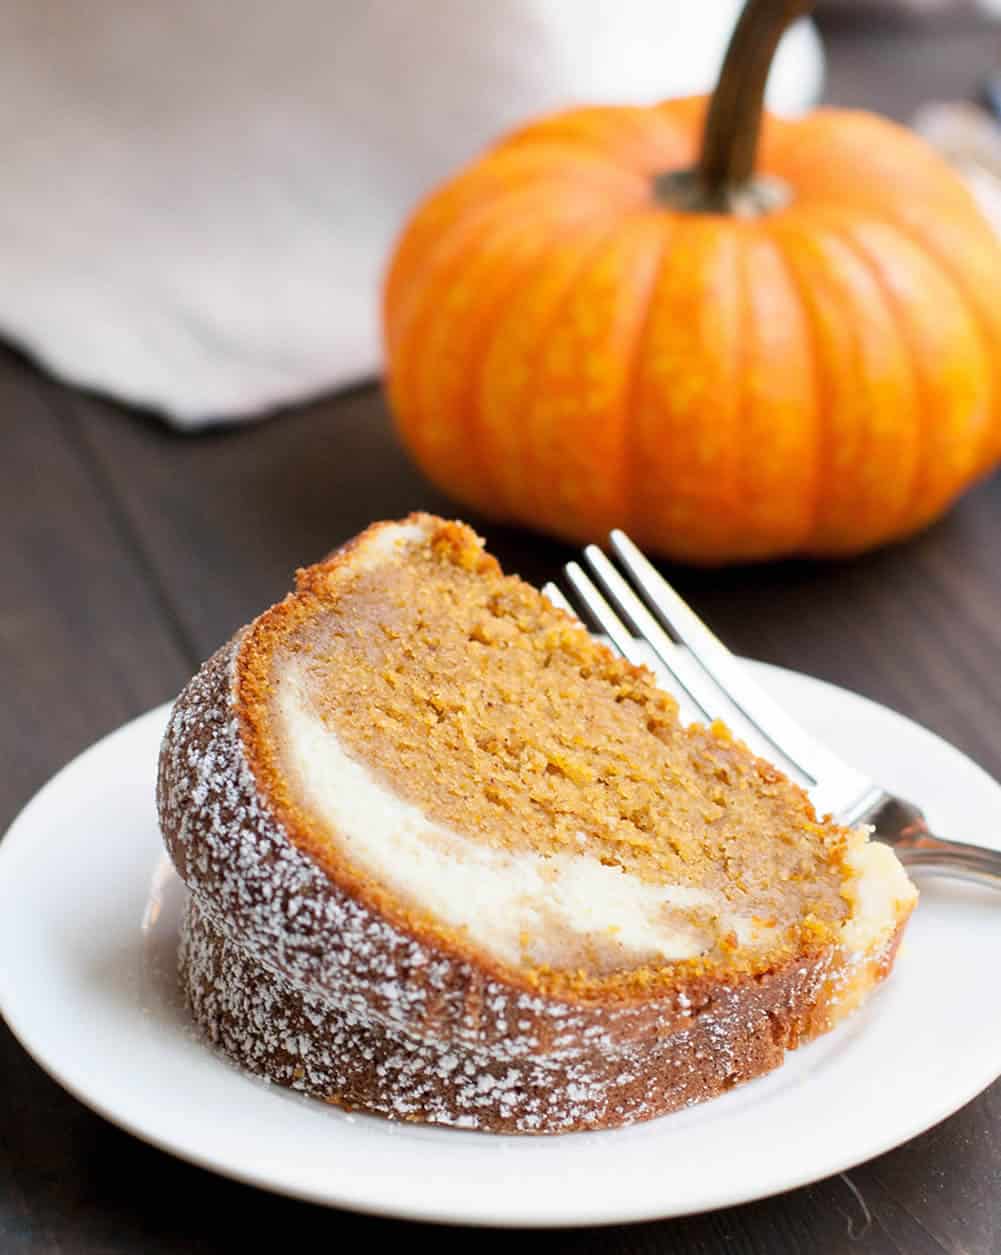 Pumpkin Ricotta Bundt Cake. Pour a sweet ricotta custard over the batter before baking. It will magically bake into a lovely swirl in this delicious cake.